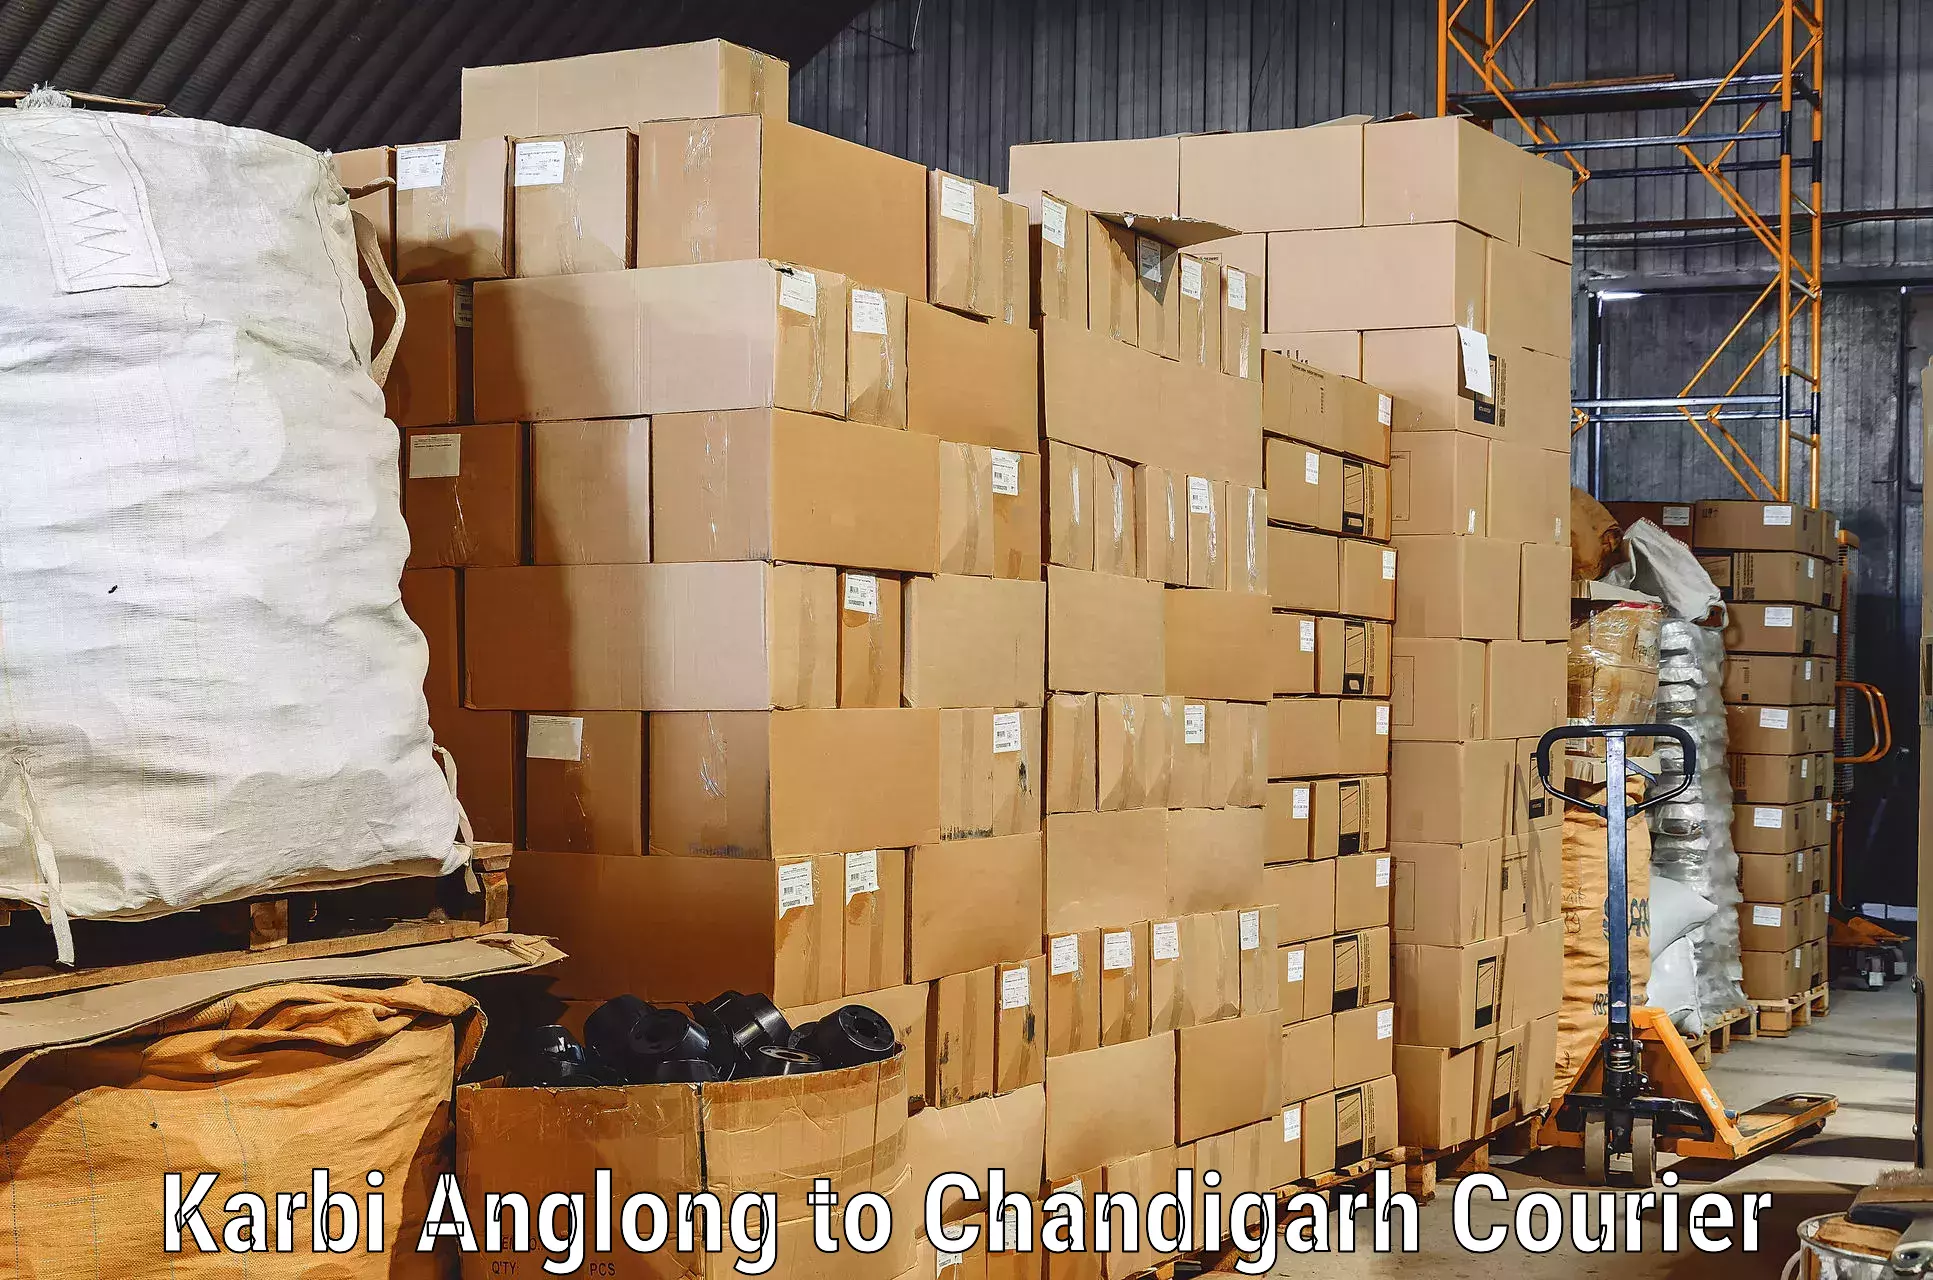 Professional movers and packers Karbi Anglong to Chandigarh